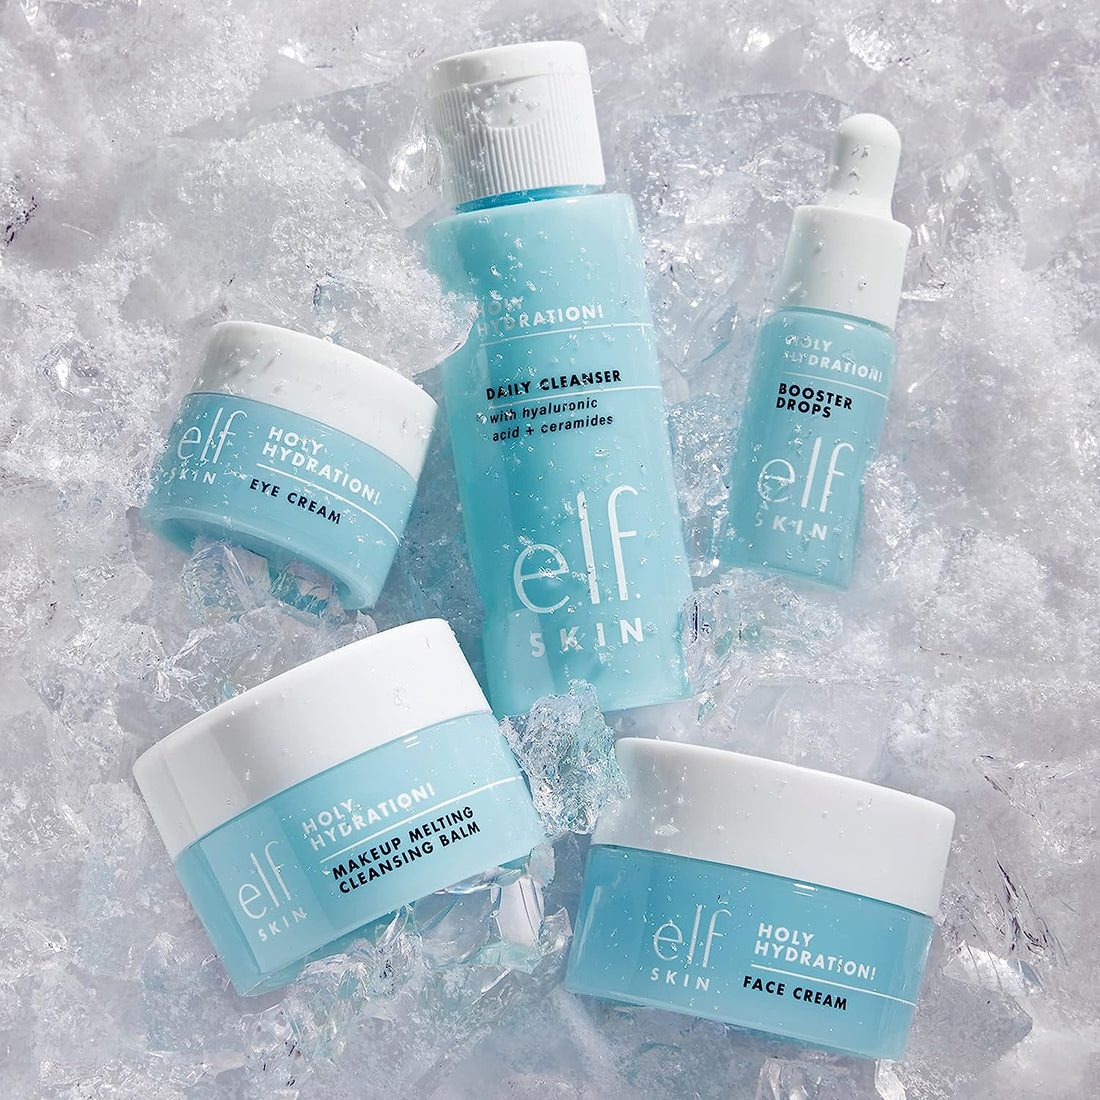 e.l.f. SKIN Hydrated Ever After Skincare Mini Kit, Cleanser, Makeup Remover, Moisturiser &amp; Eye Cream For Hydrating Skin, Airplane-Friendly Sizes